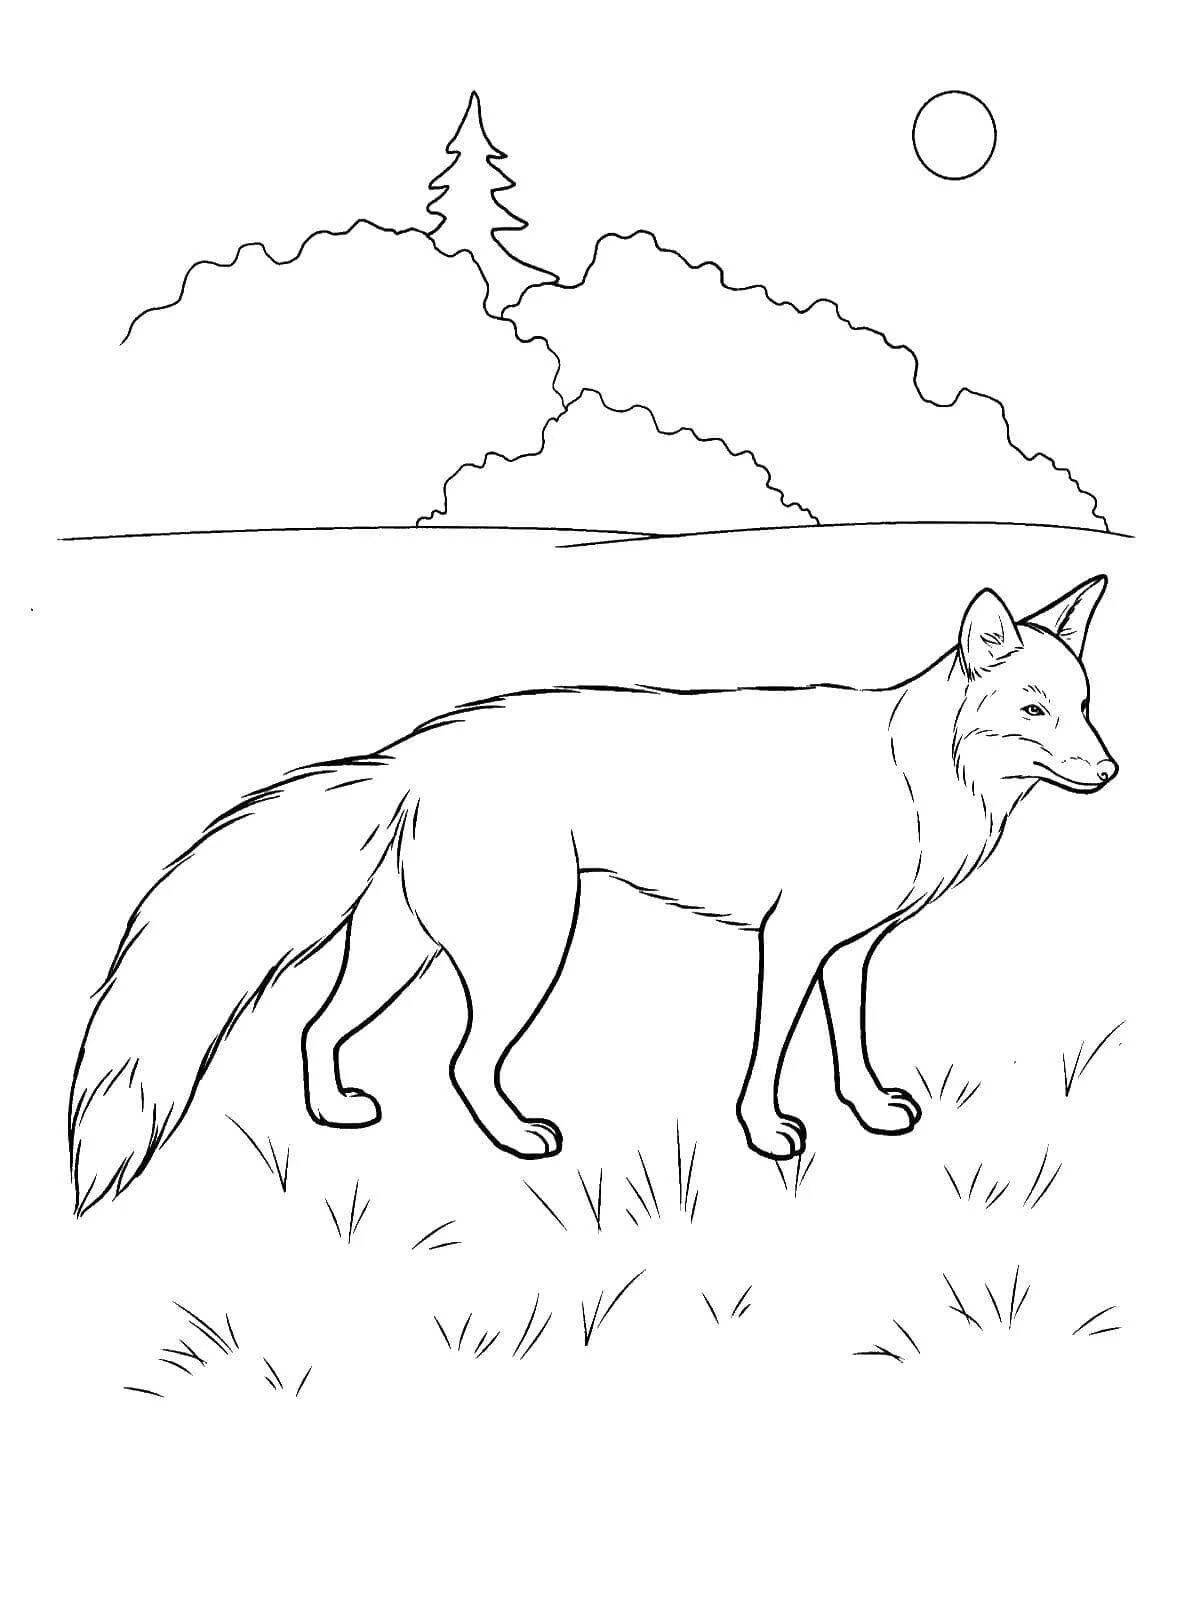 Coloring page magical fox in winter